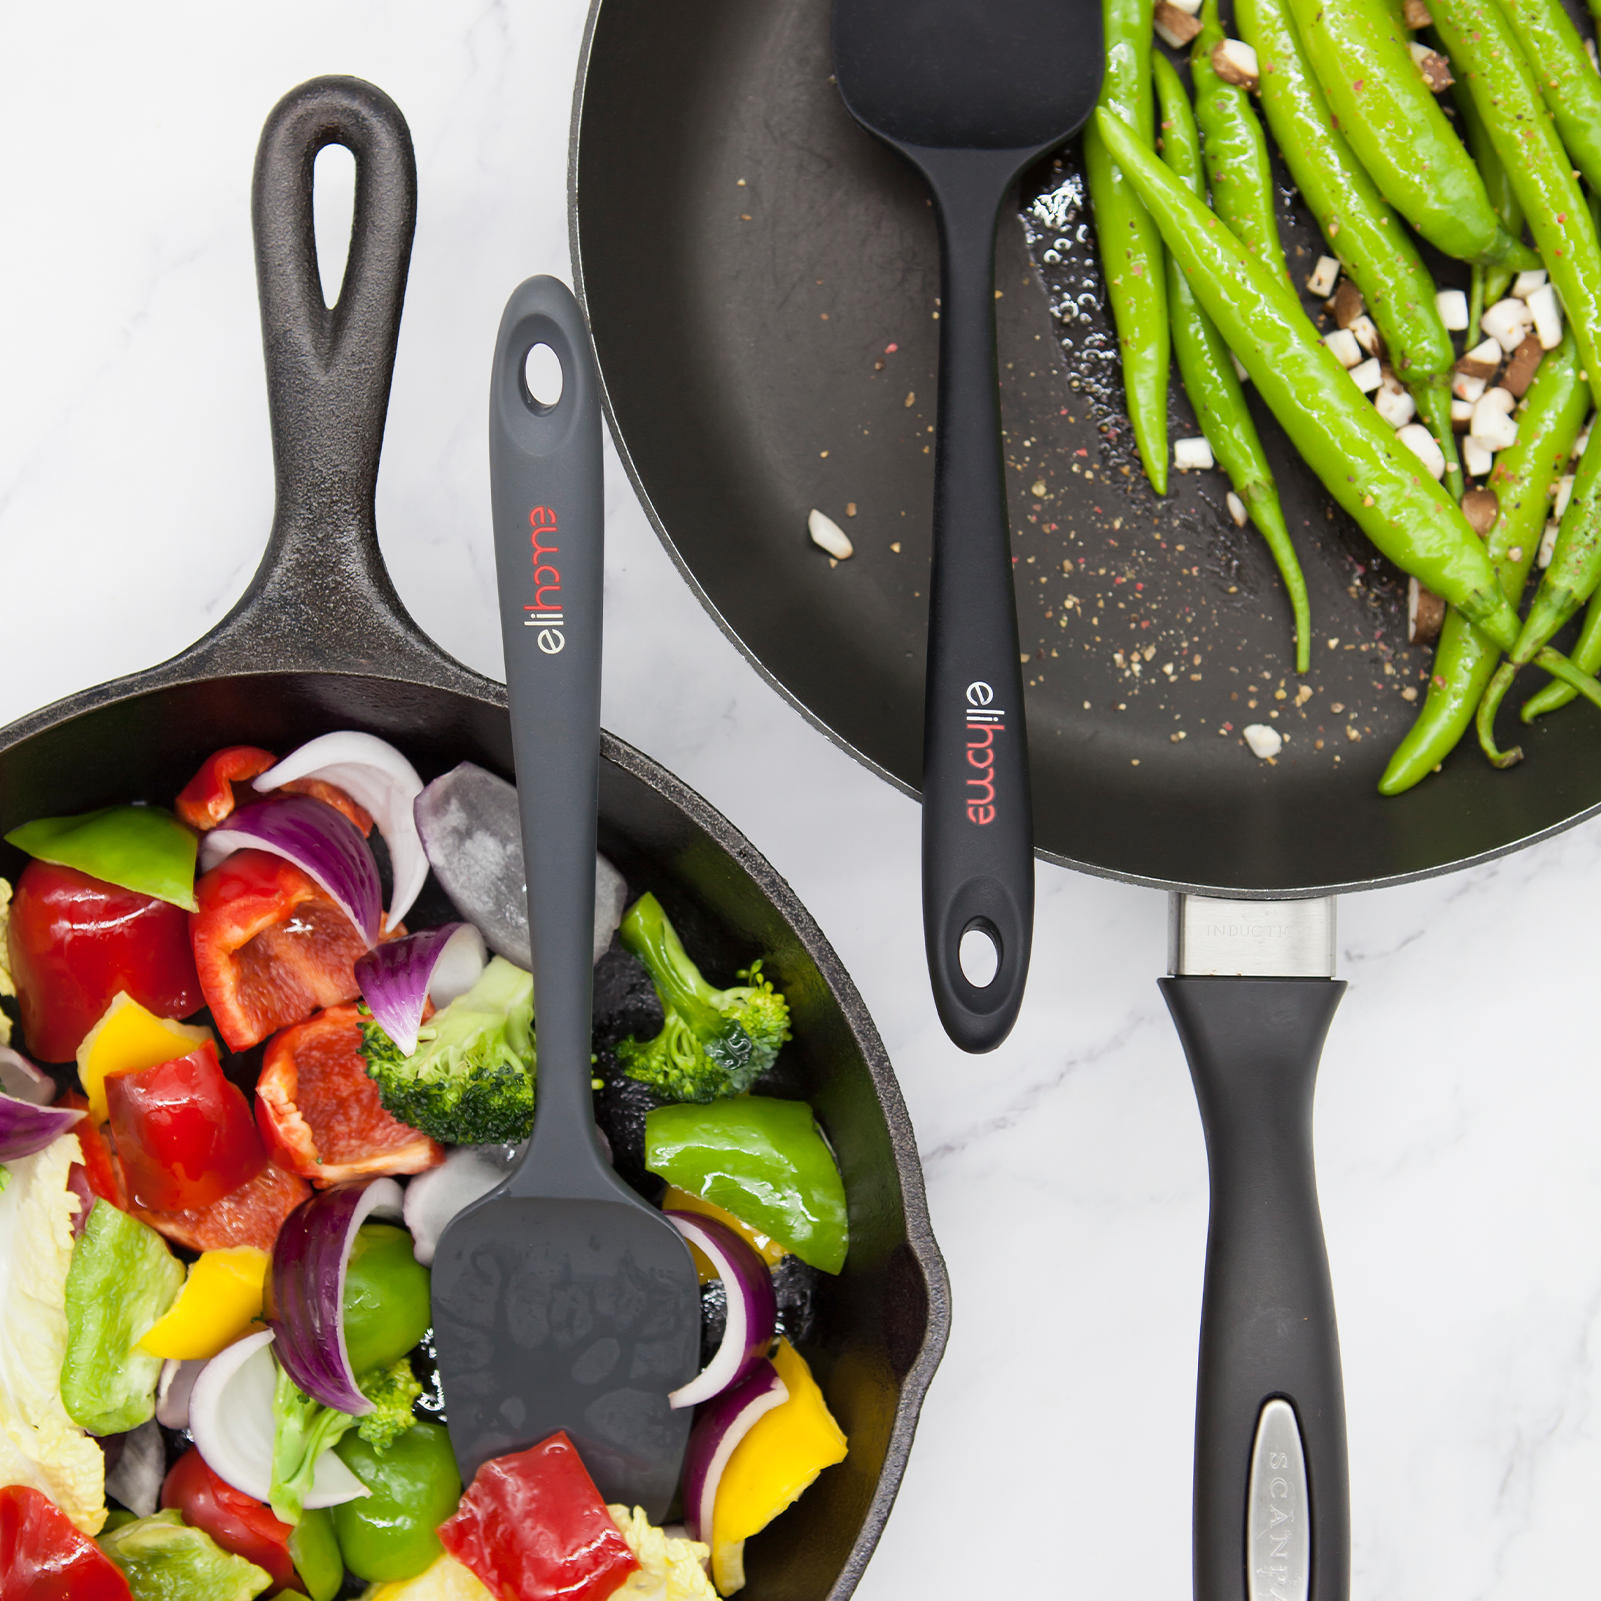 T-fal Nonstick 3-Piece Fry Pan Review: Budget Set That Performs